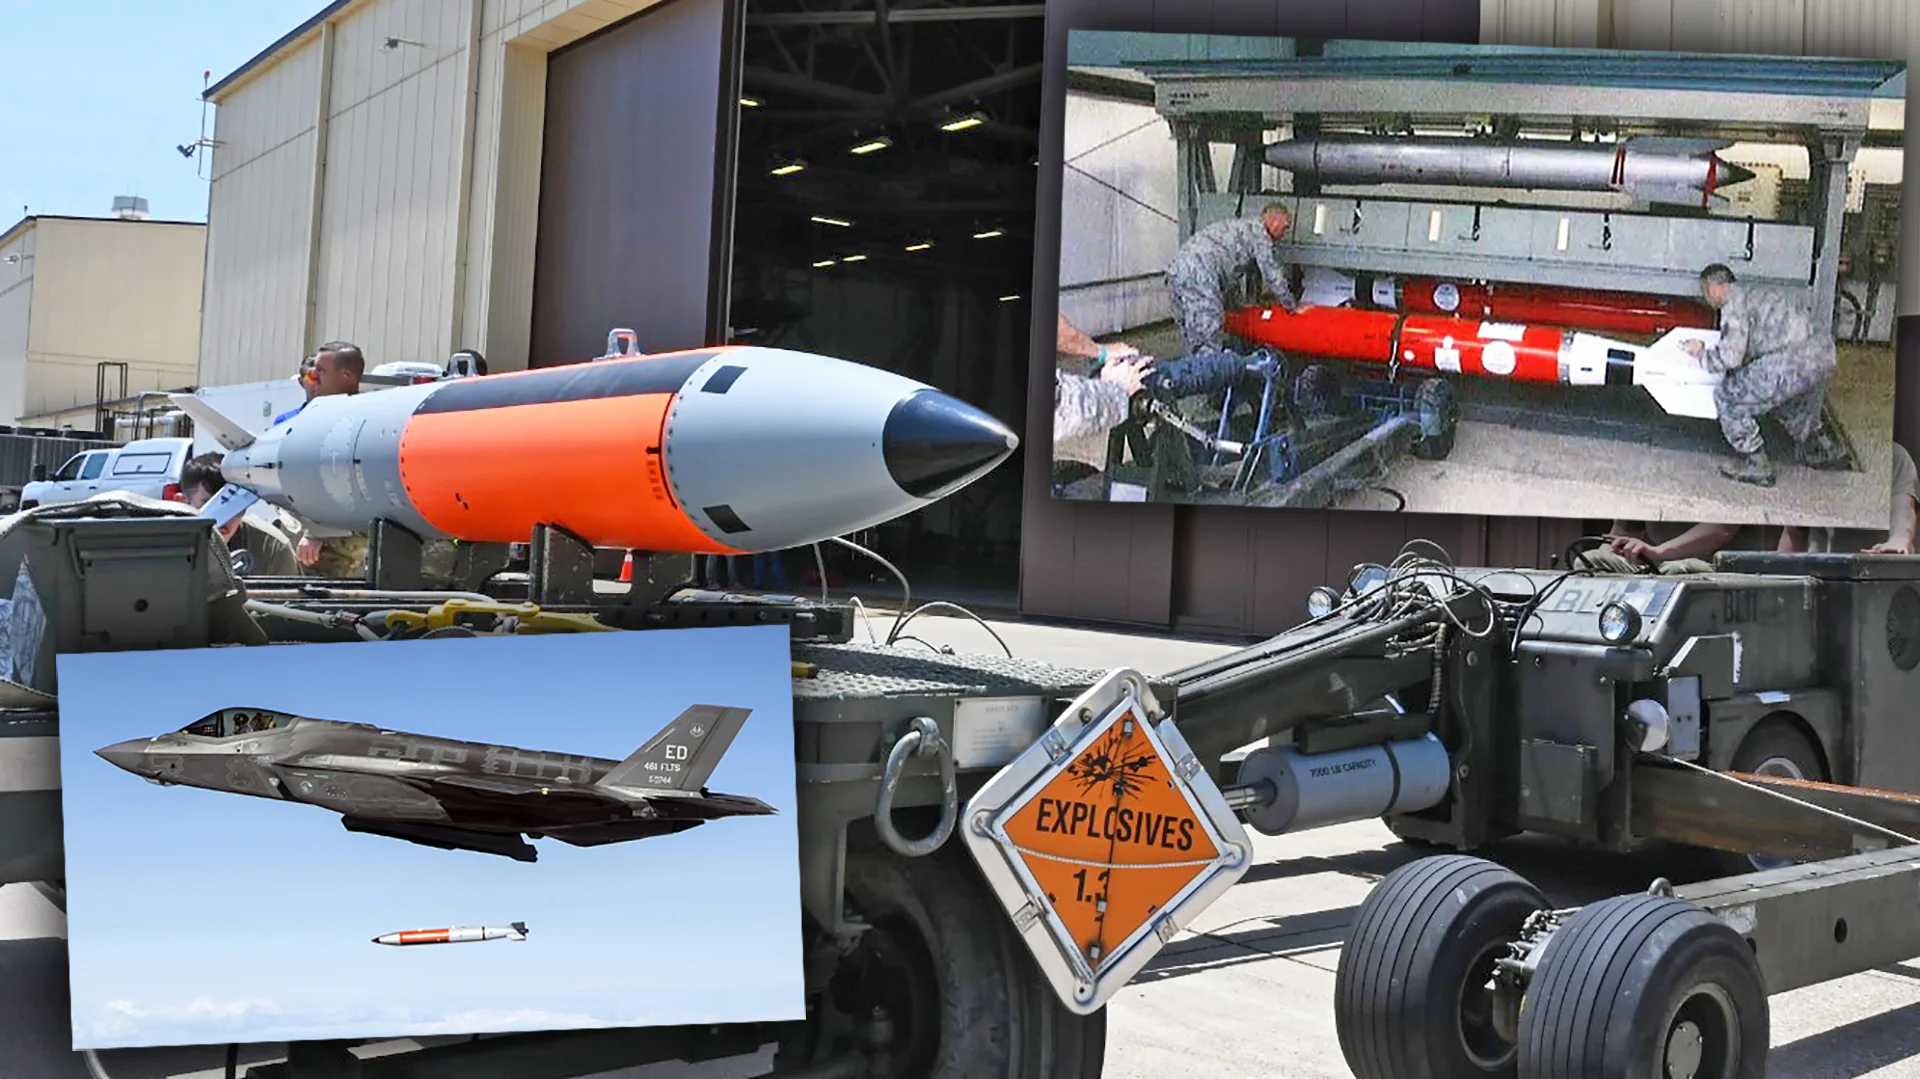 US B61 variable-yield nuclear bomb may have been damaged in the Netherlands